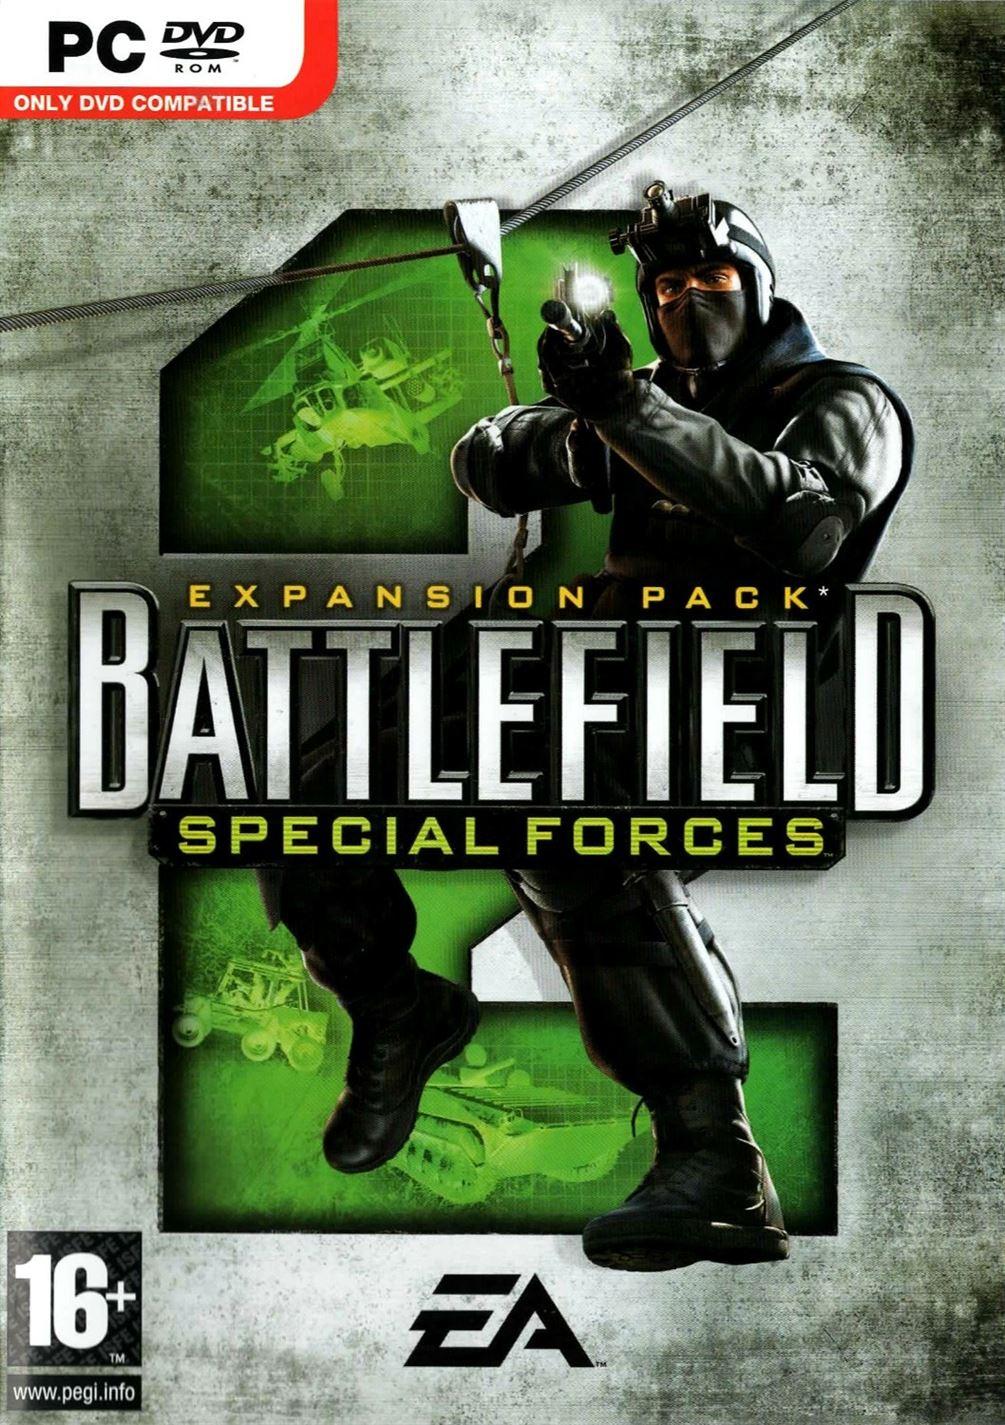 Battlefield 2 Special Forces Expansion Pack (PC) - UK Seller